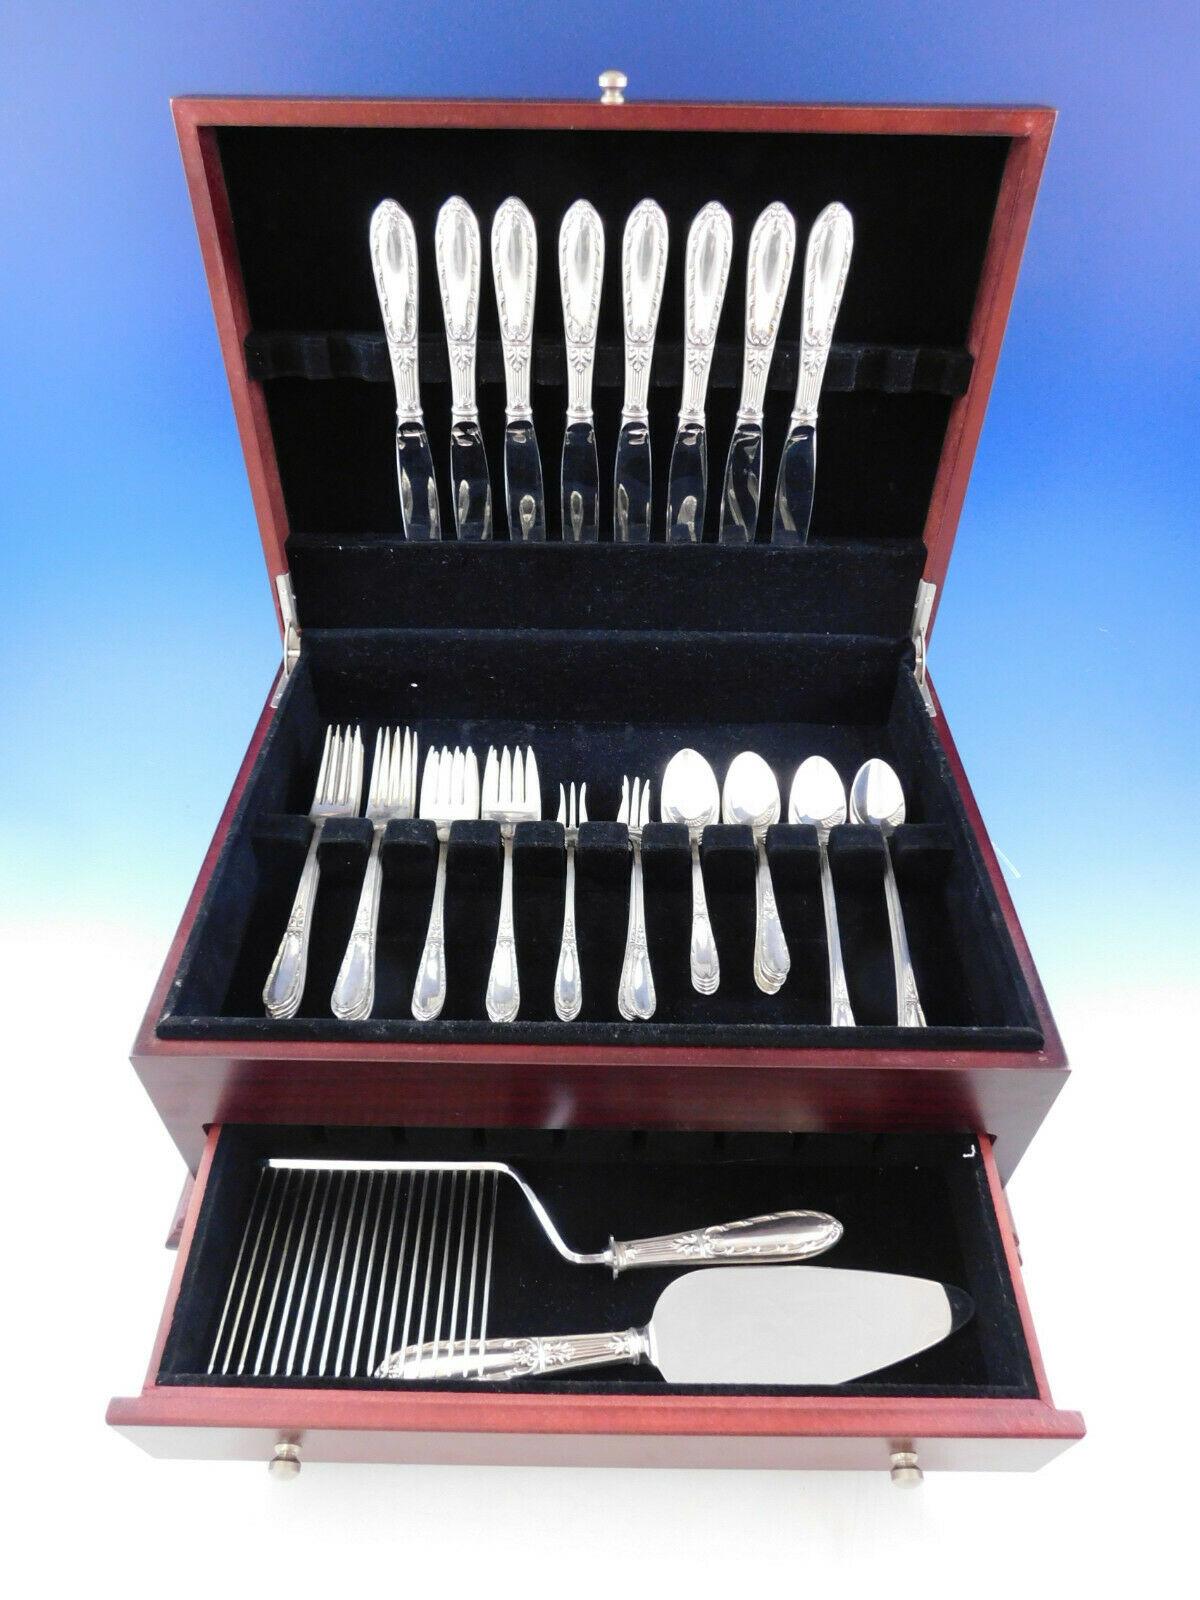 Scarce Arcadia by Amston circa 1949 sterling silver flatware set of 50 pieces. This set includes:

8 knives, 9 1/8